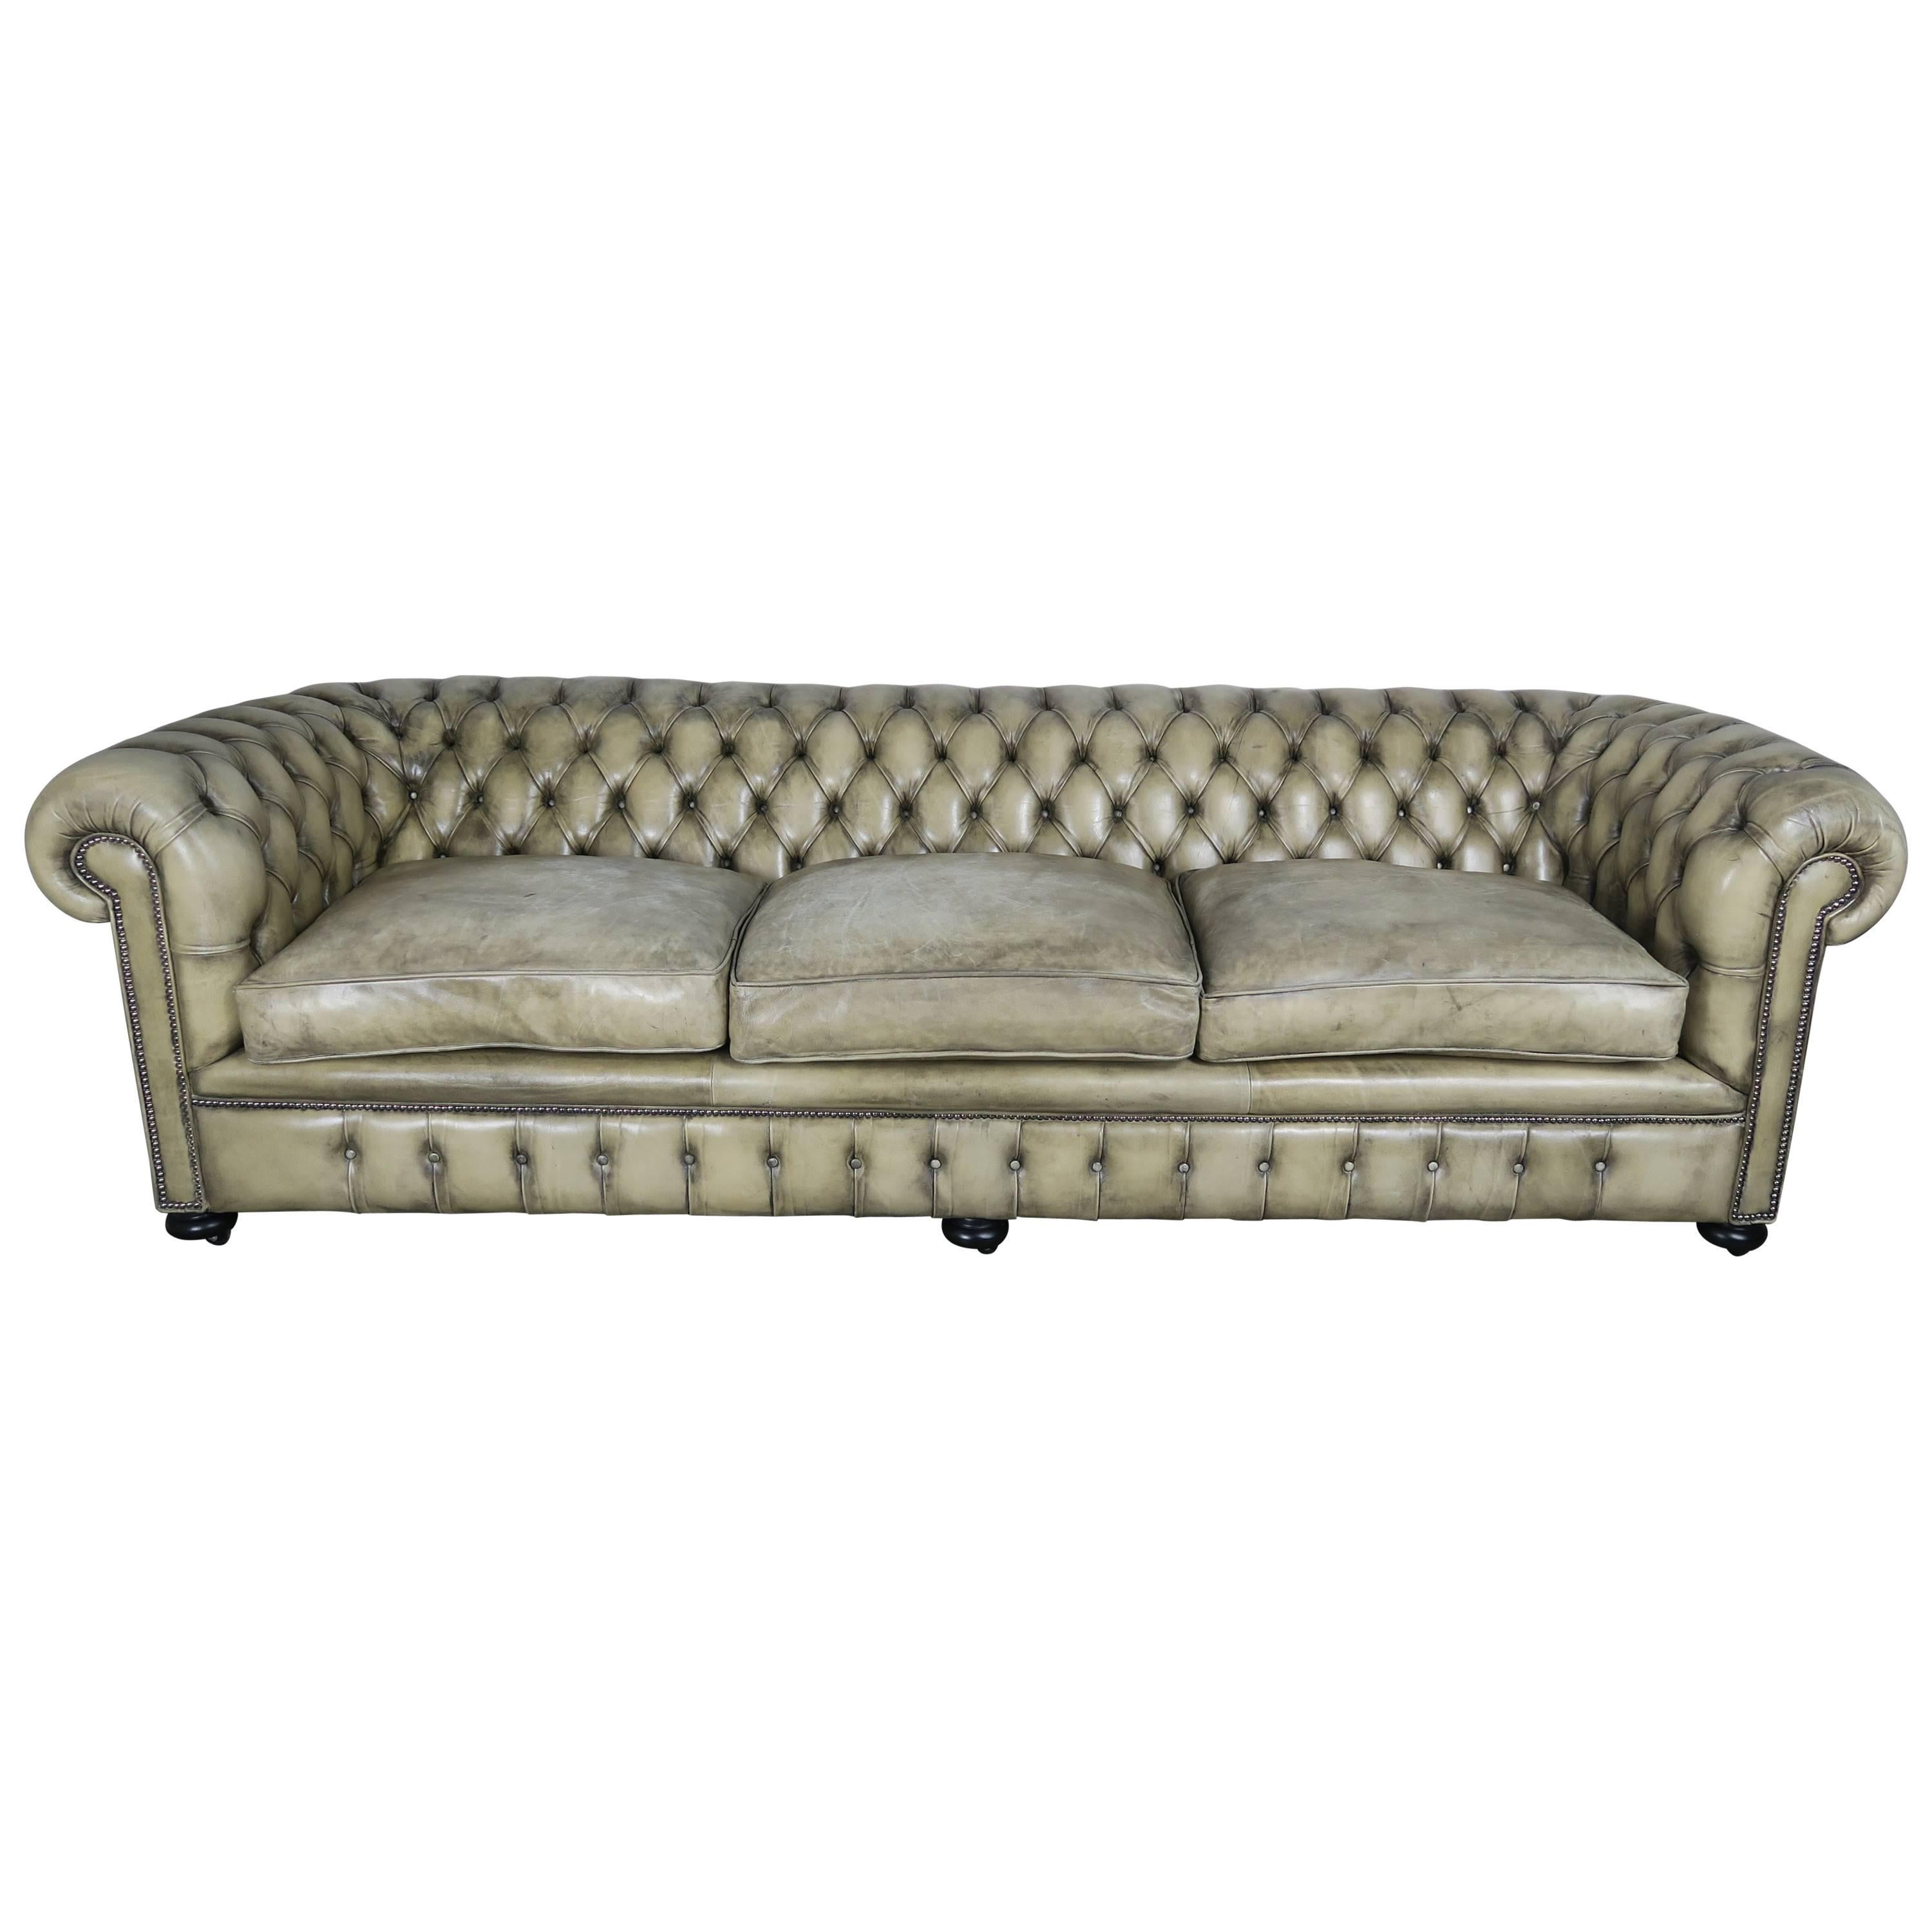 English Leather Tufted Chesterfield Sofa